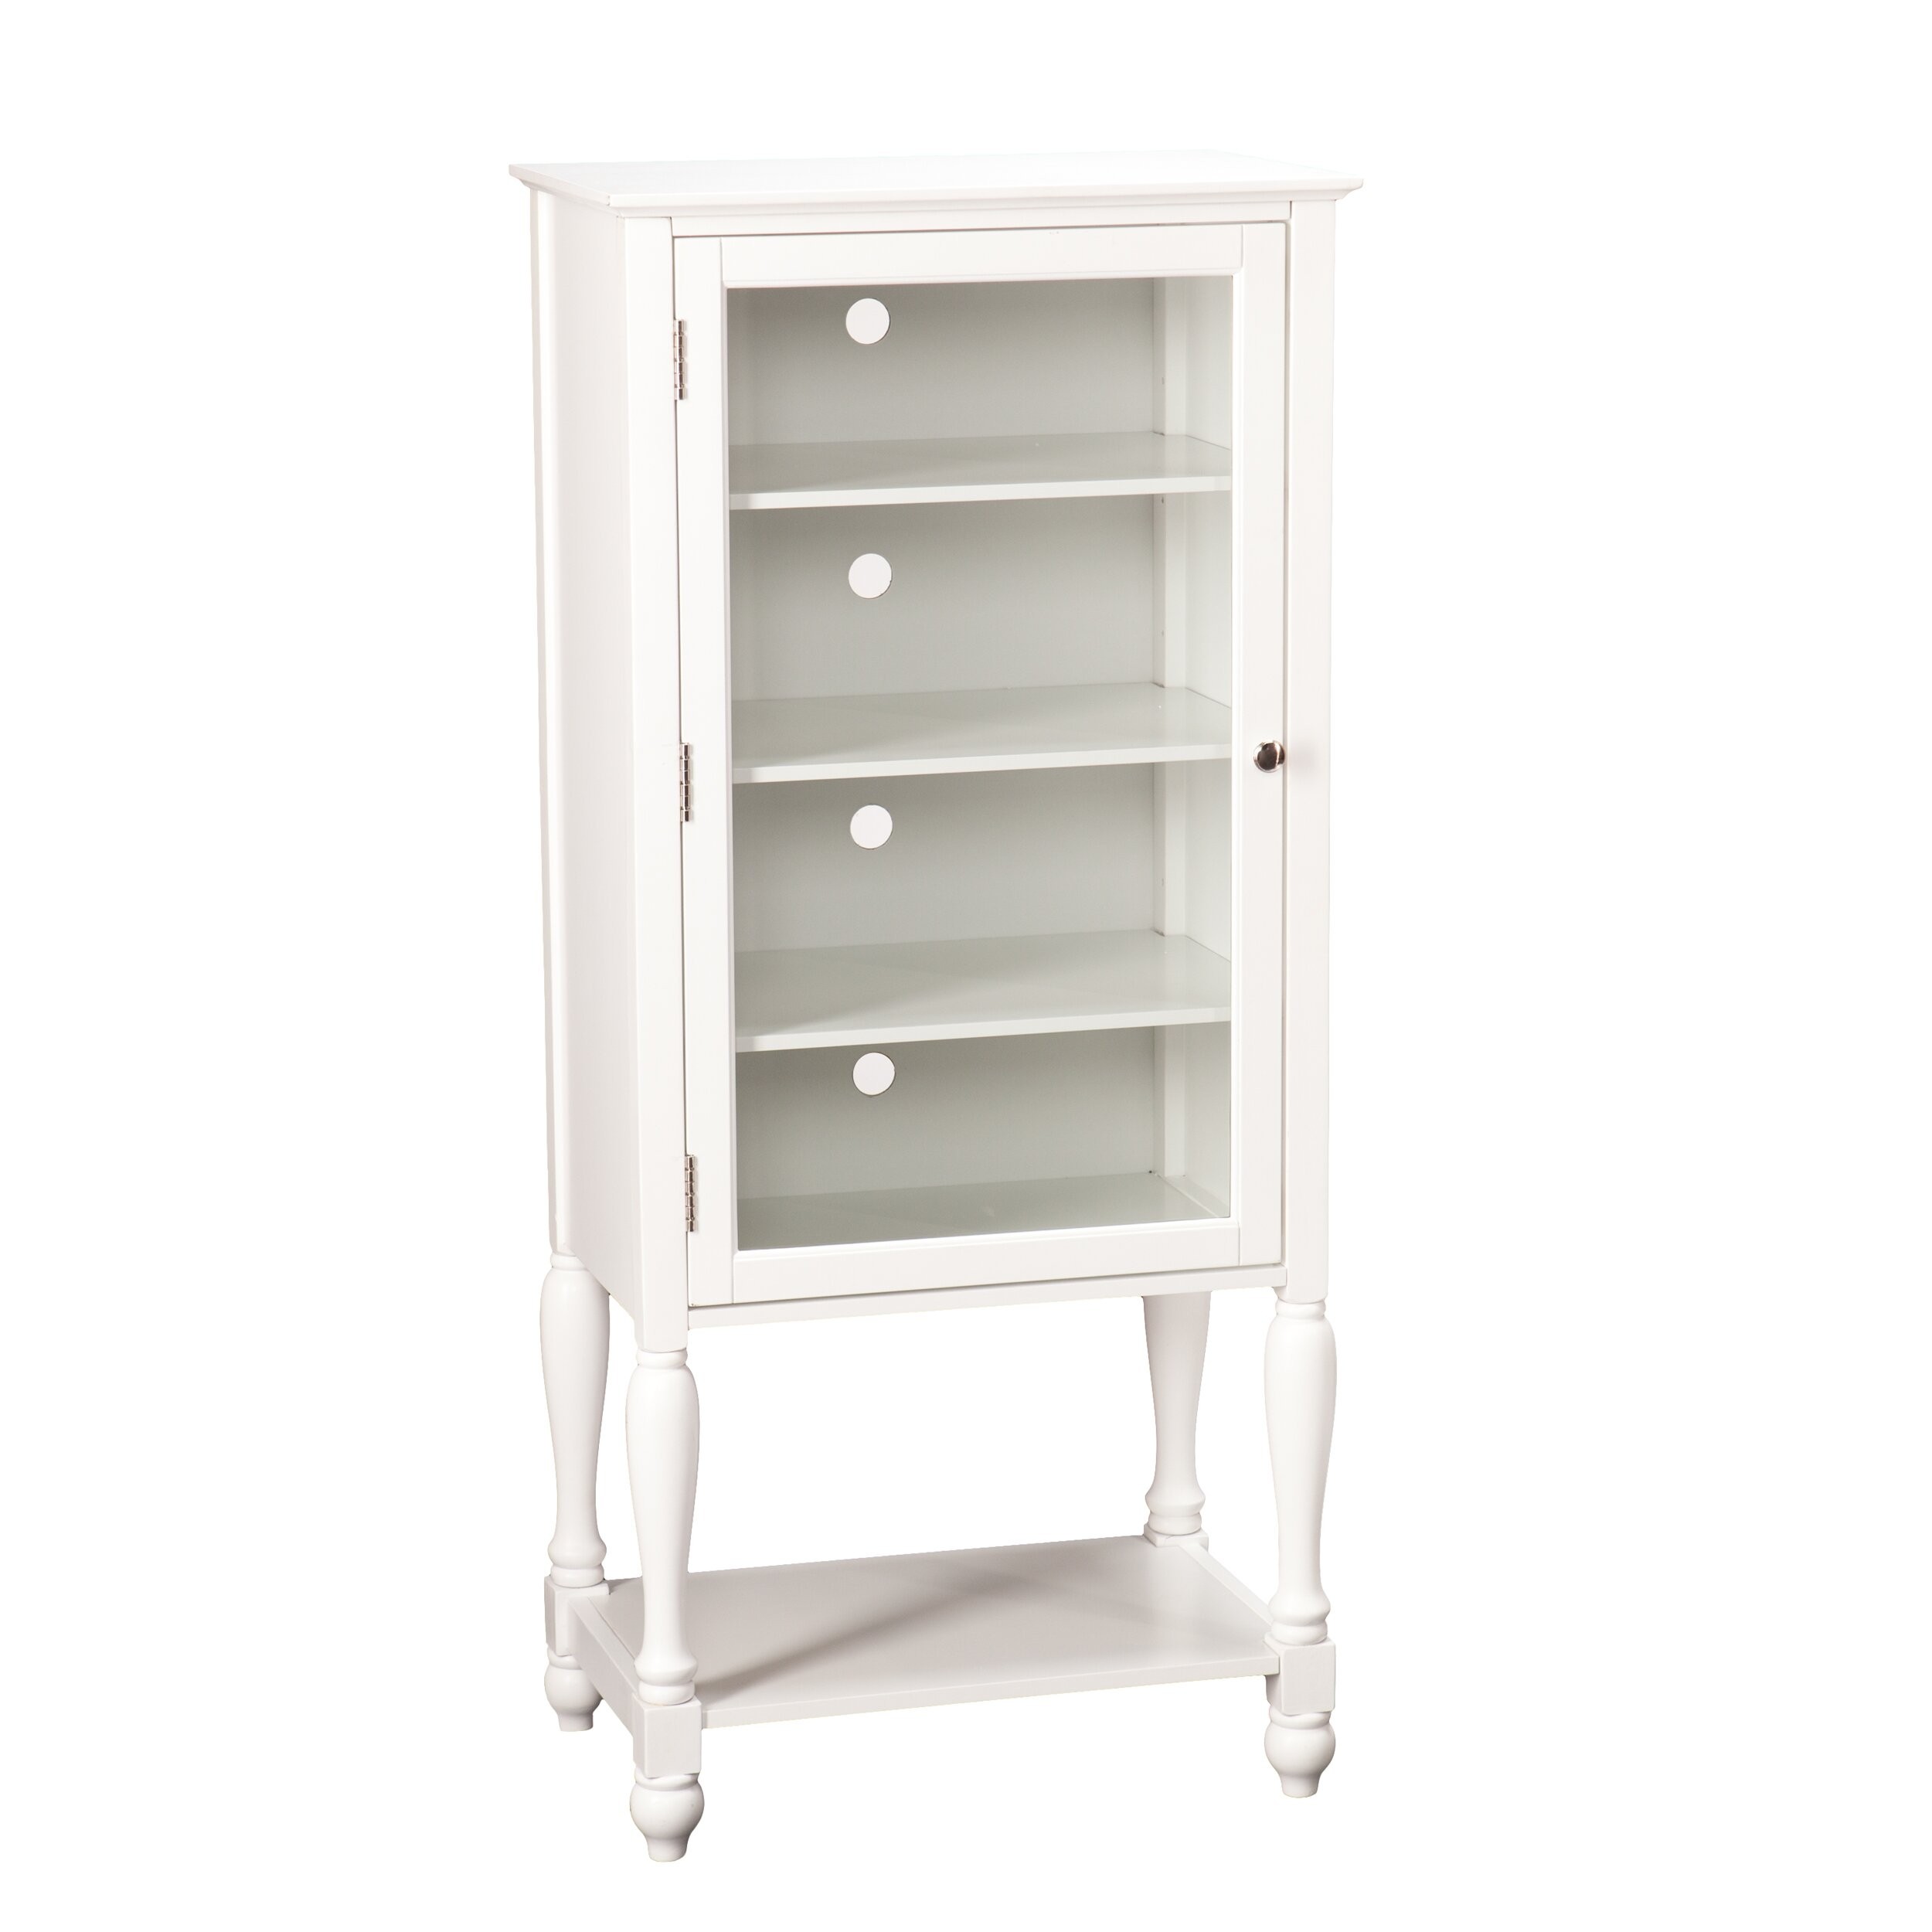 Darby home co solid wood curio cabinet reviews wayfair 4